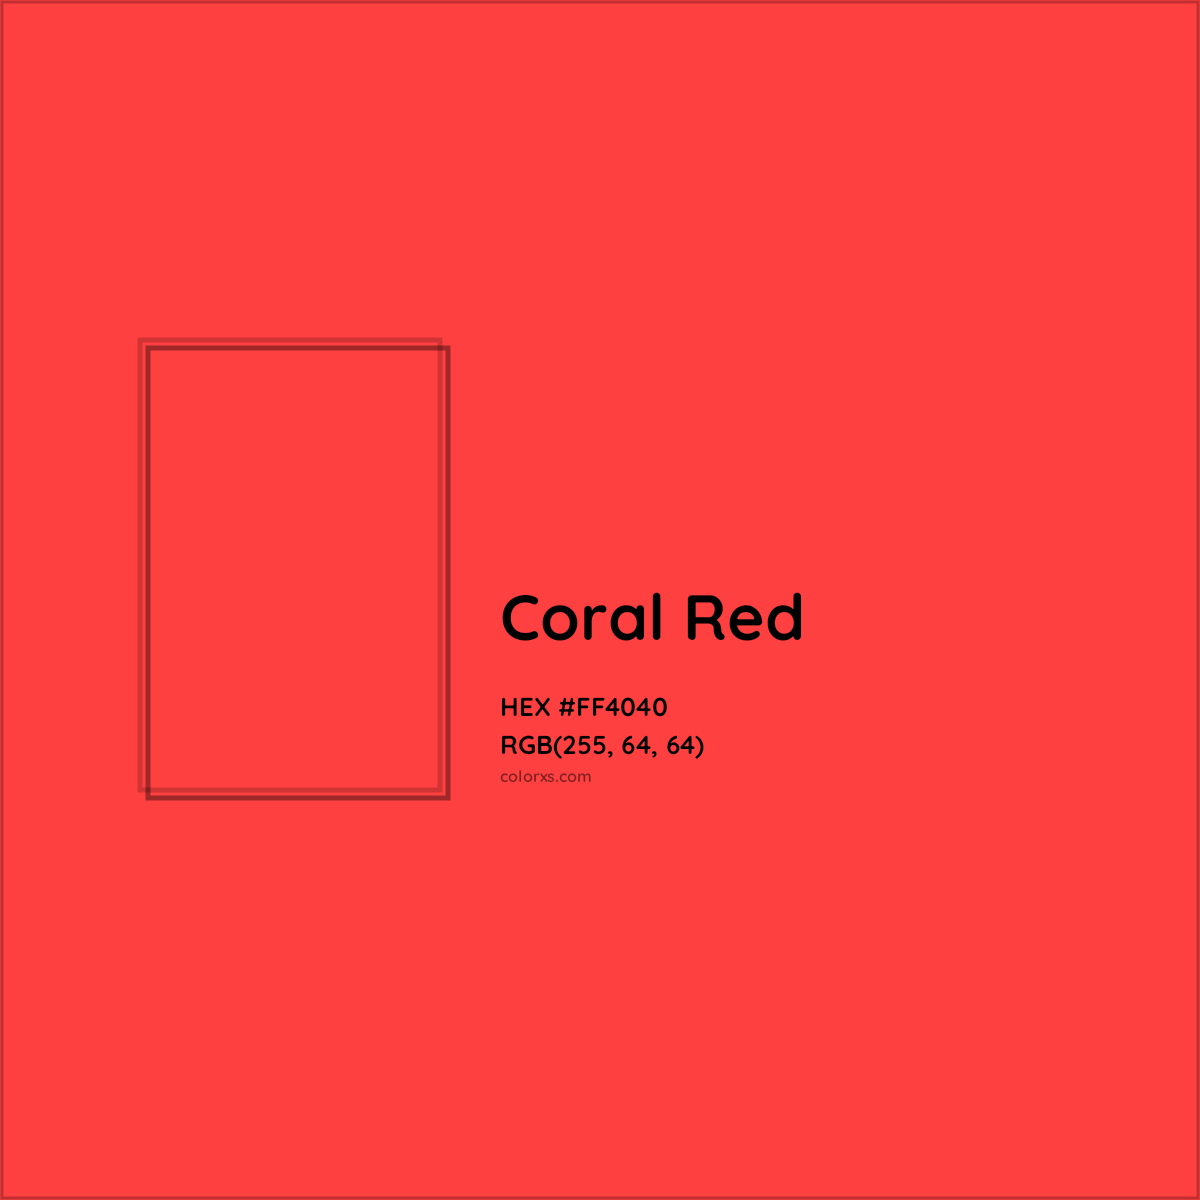 HEX #FF4040 Coral Red Color - Color Code